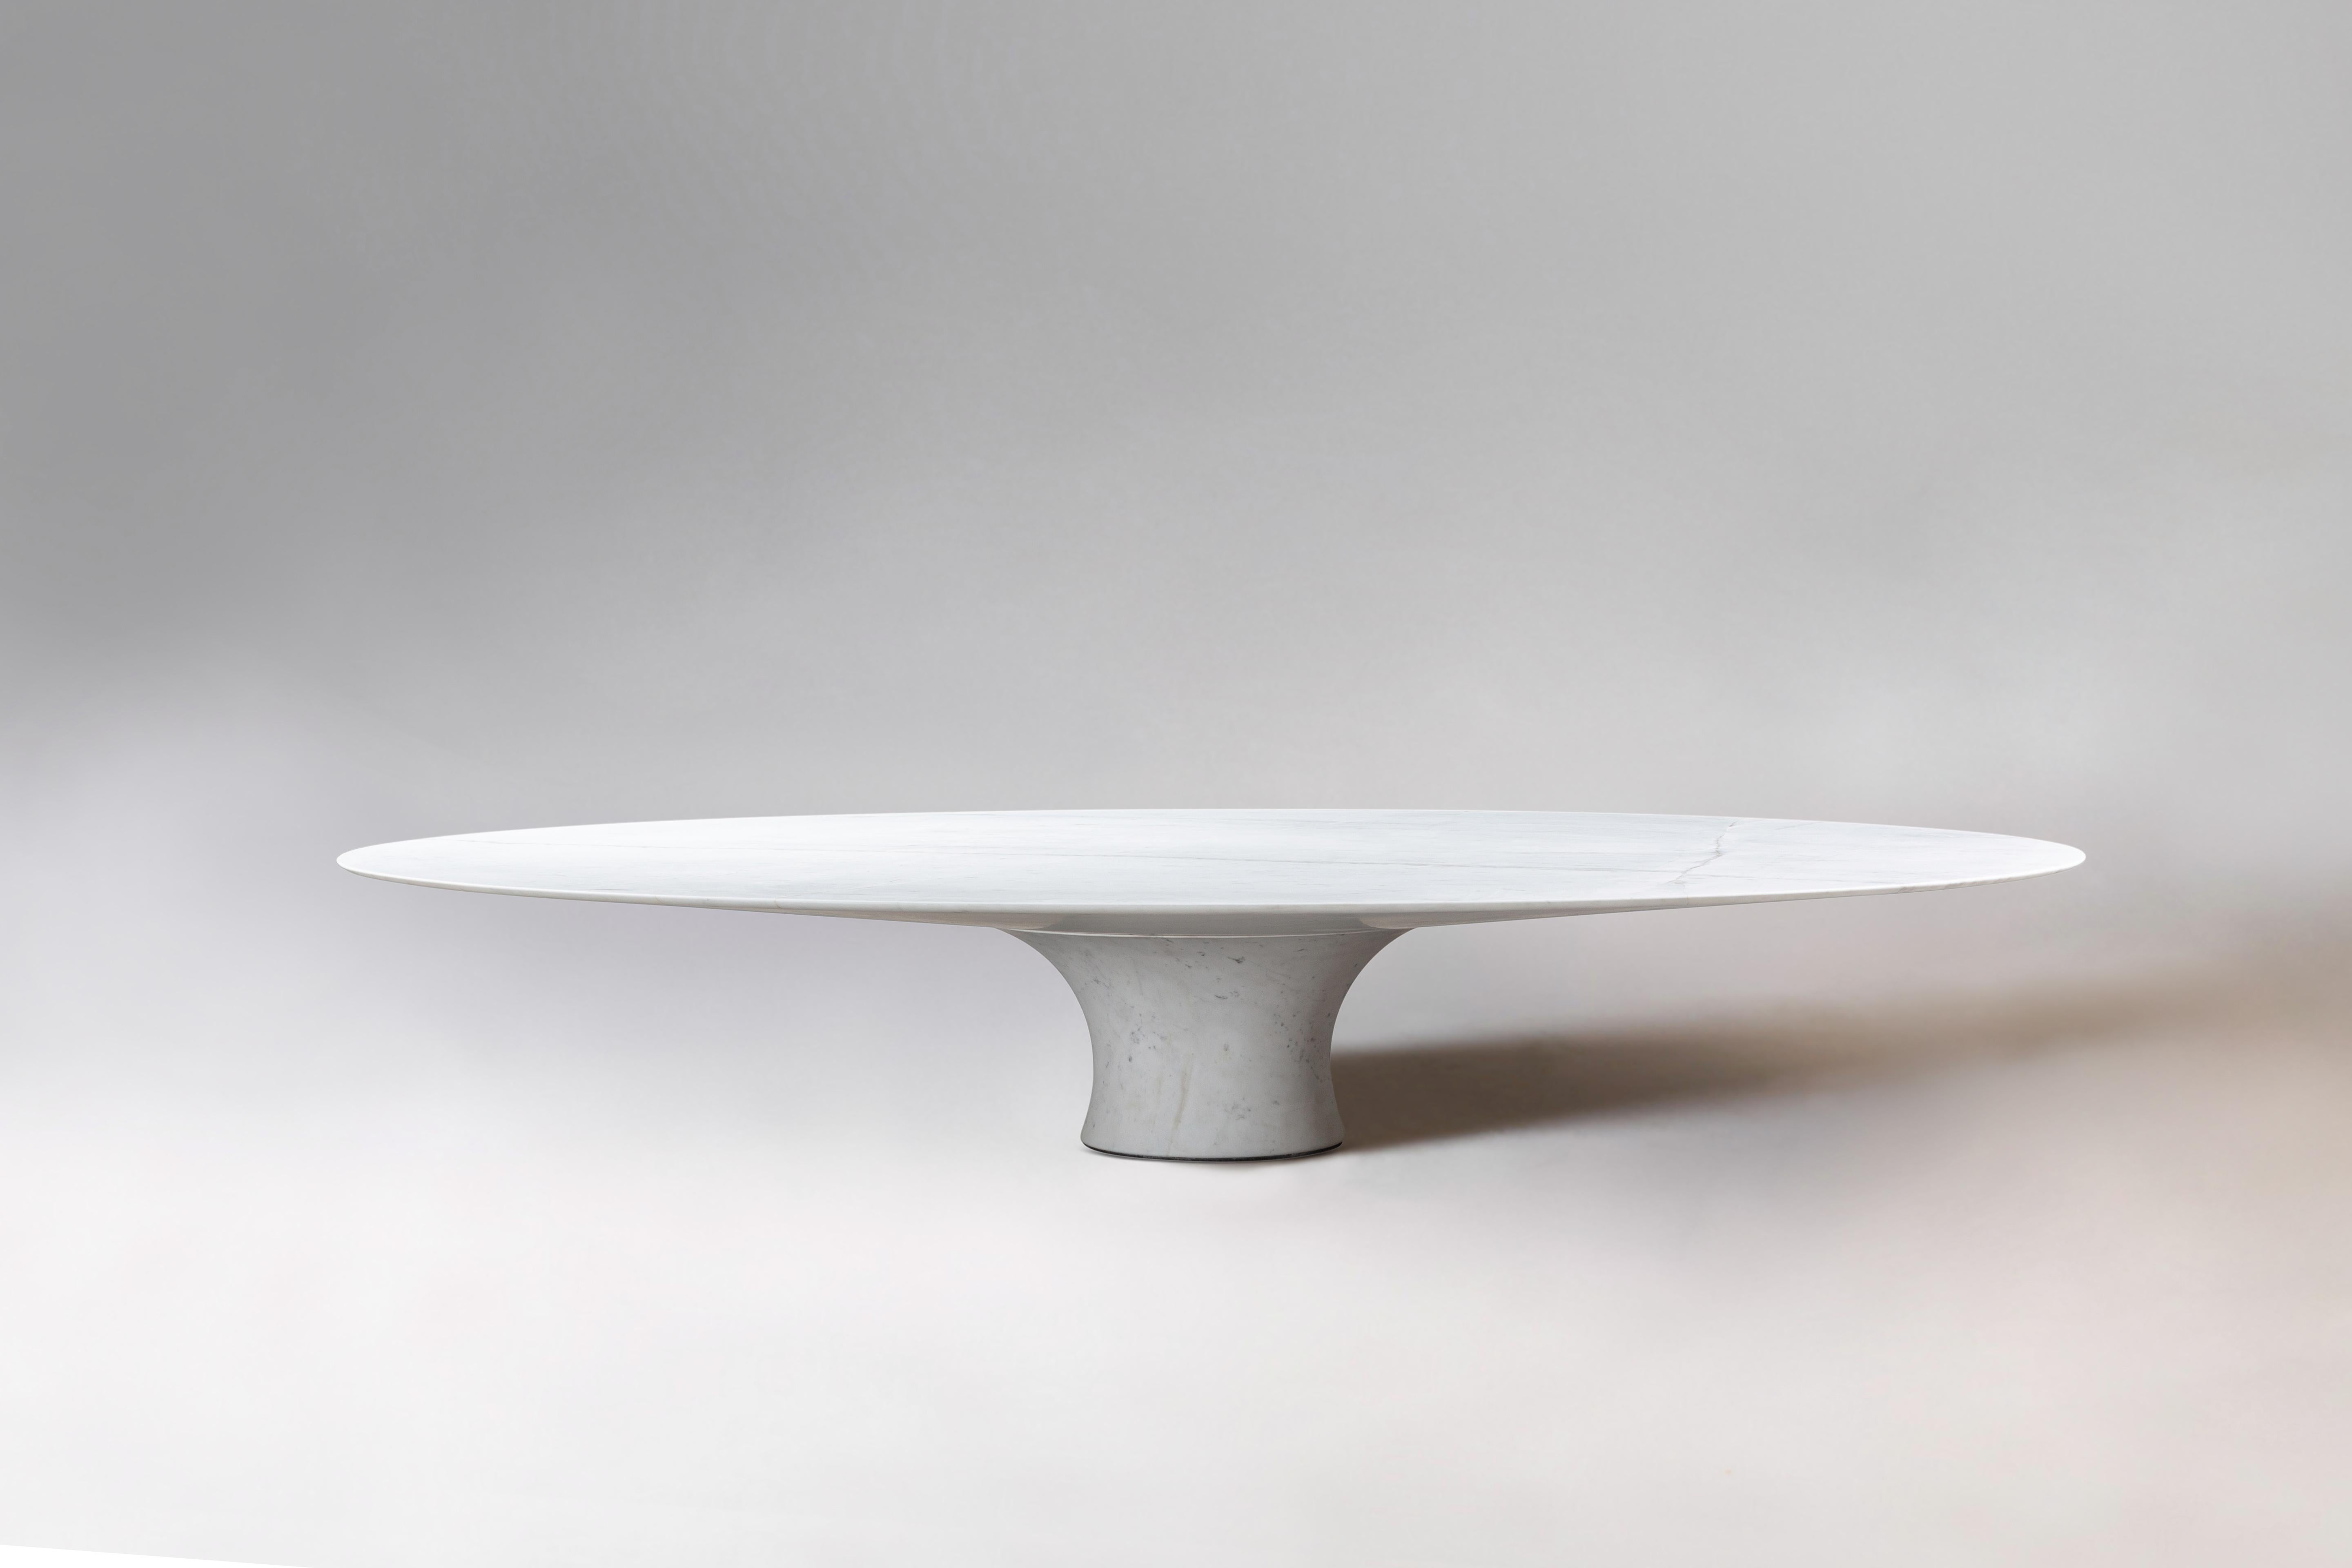 Kyknos Refined Contemporary Marble Oval Low Table 210 / 75
Dimensions: 210 x 75 cm
Materials: Kynos marble

Angelo is the essence of a round table in natural stone, a sculptural shape in robust material with elegant lines and refined finishes.

The